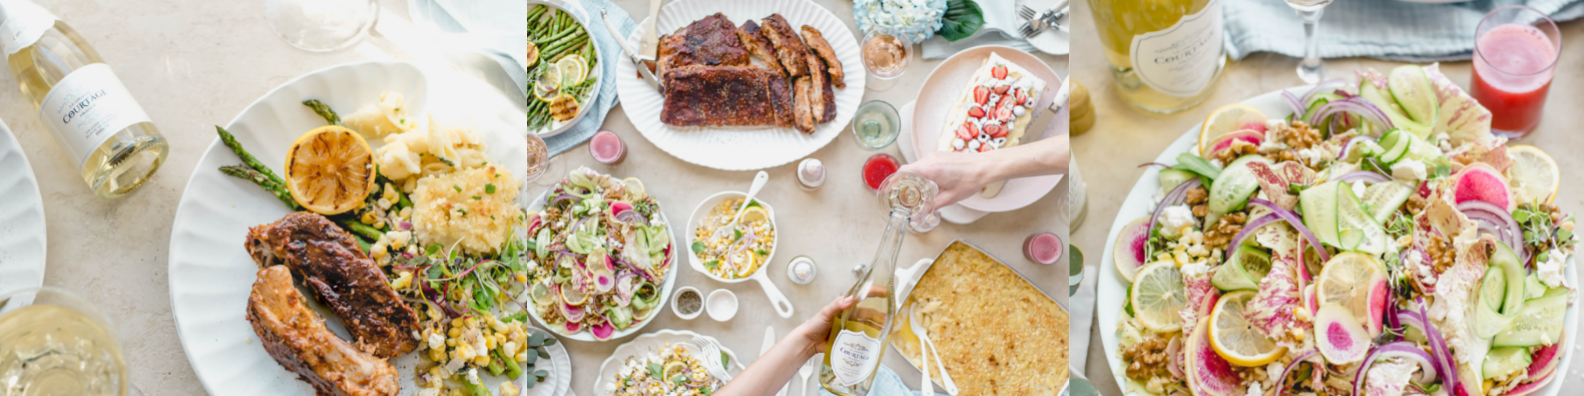 Summer Picnic, Food and Wine Pairings